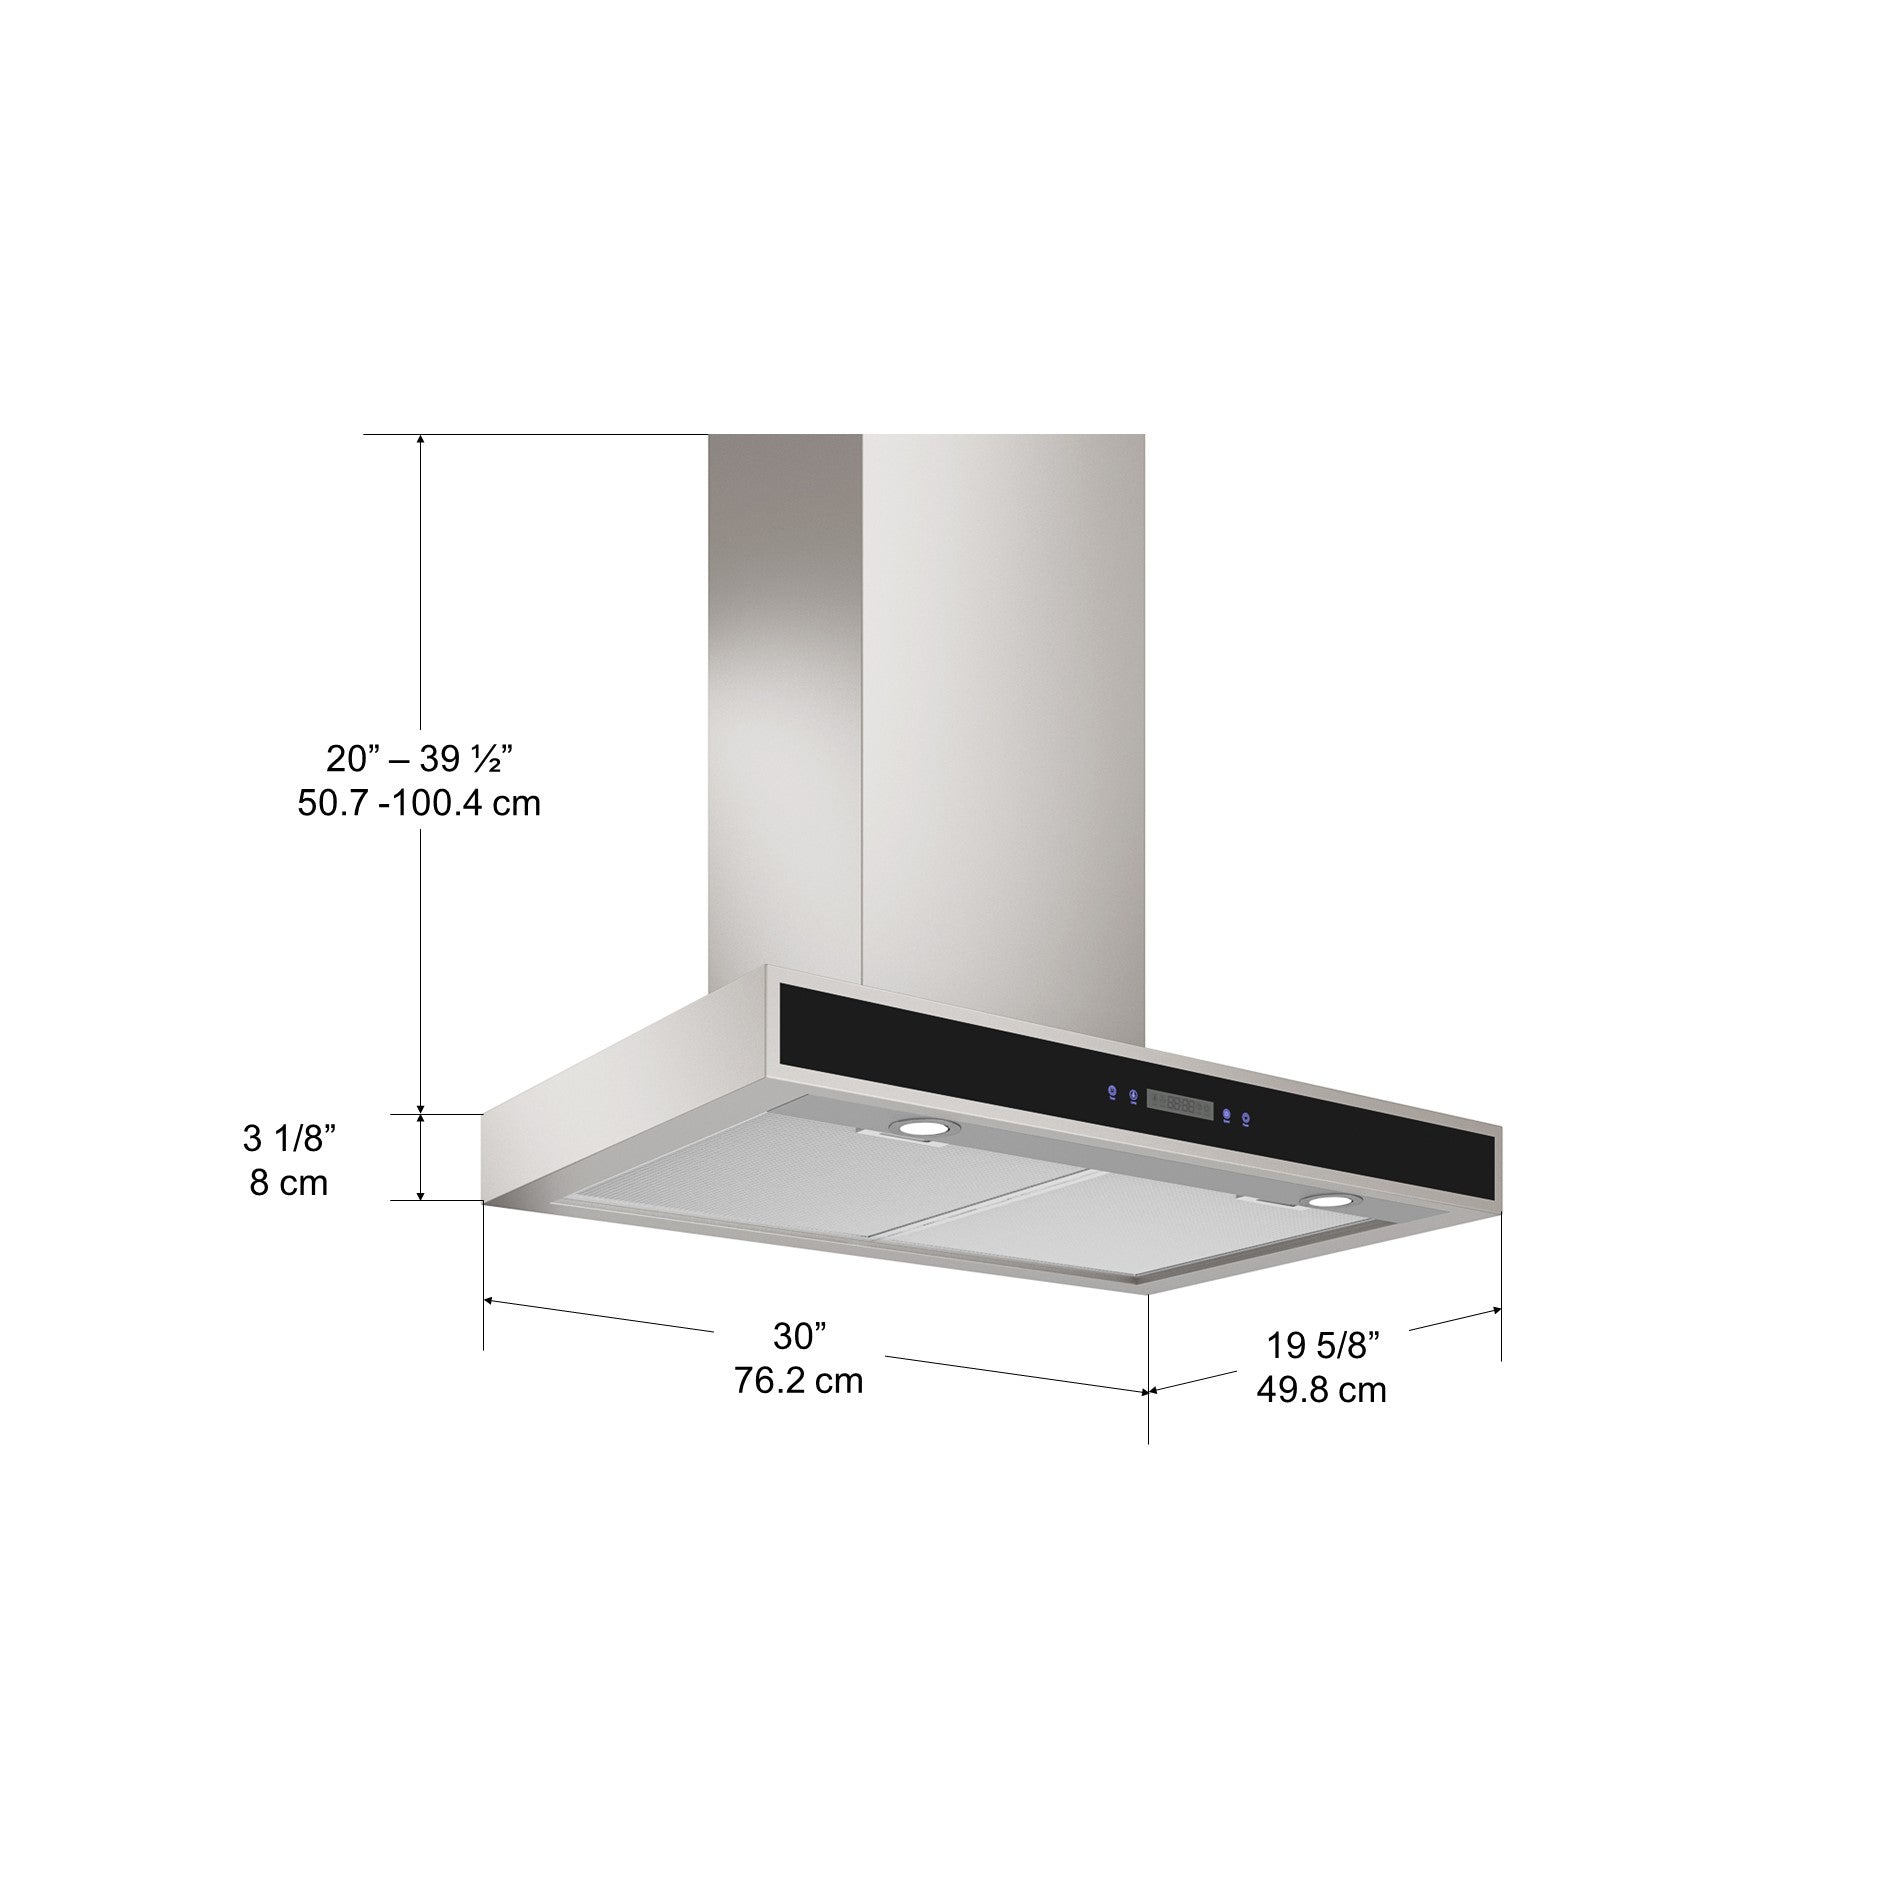 WRP430 30 in. Convertible Wall Mounted Range Hood with LED Lights in Stainless Steel